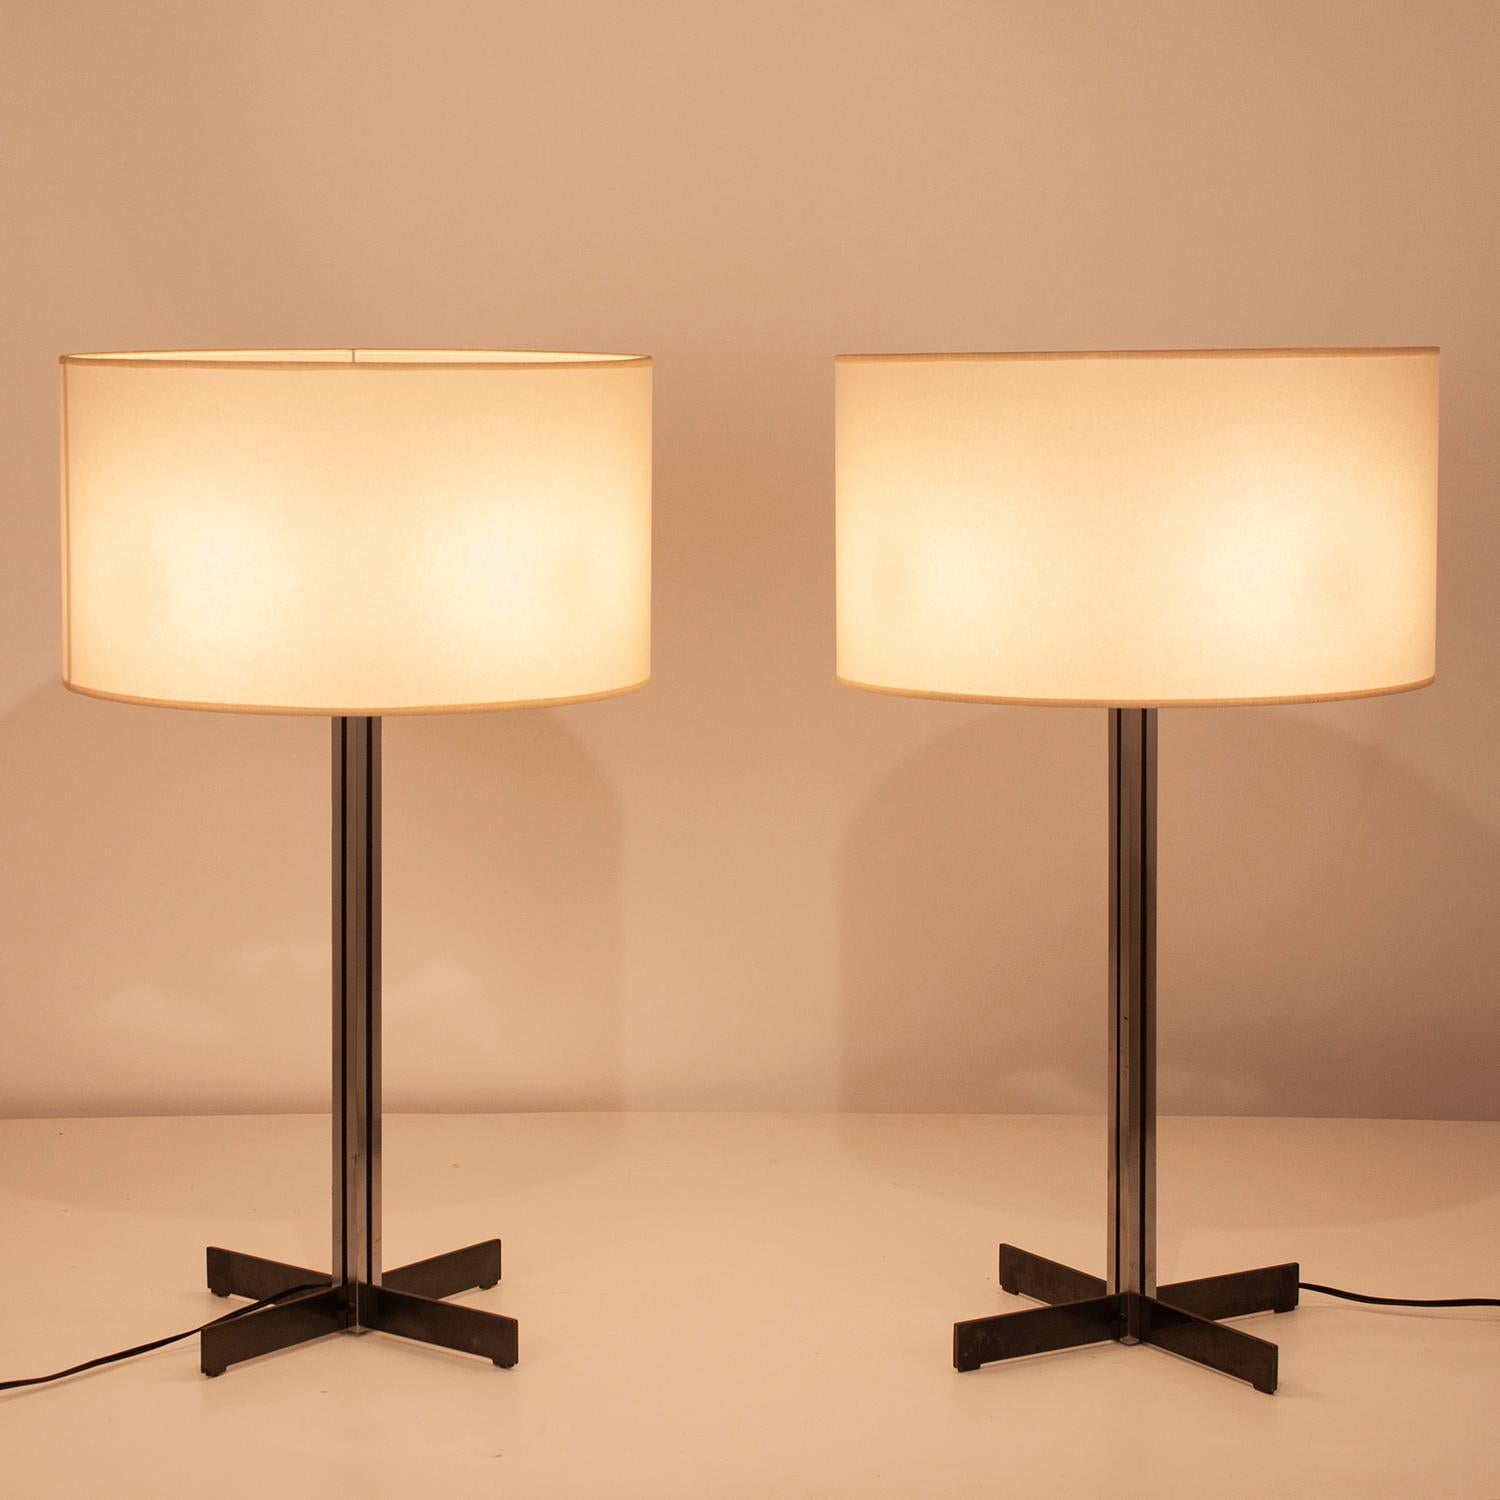 Pair of lamps by José María Fargas I Falp. Spain, 1966. By Metalarte.
This lamp is in the design museum of Barcelona,.
José María Fargas I Falp graduated from the Barcelona School of Architecture in 1952, where he was a professor between 1967 and